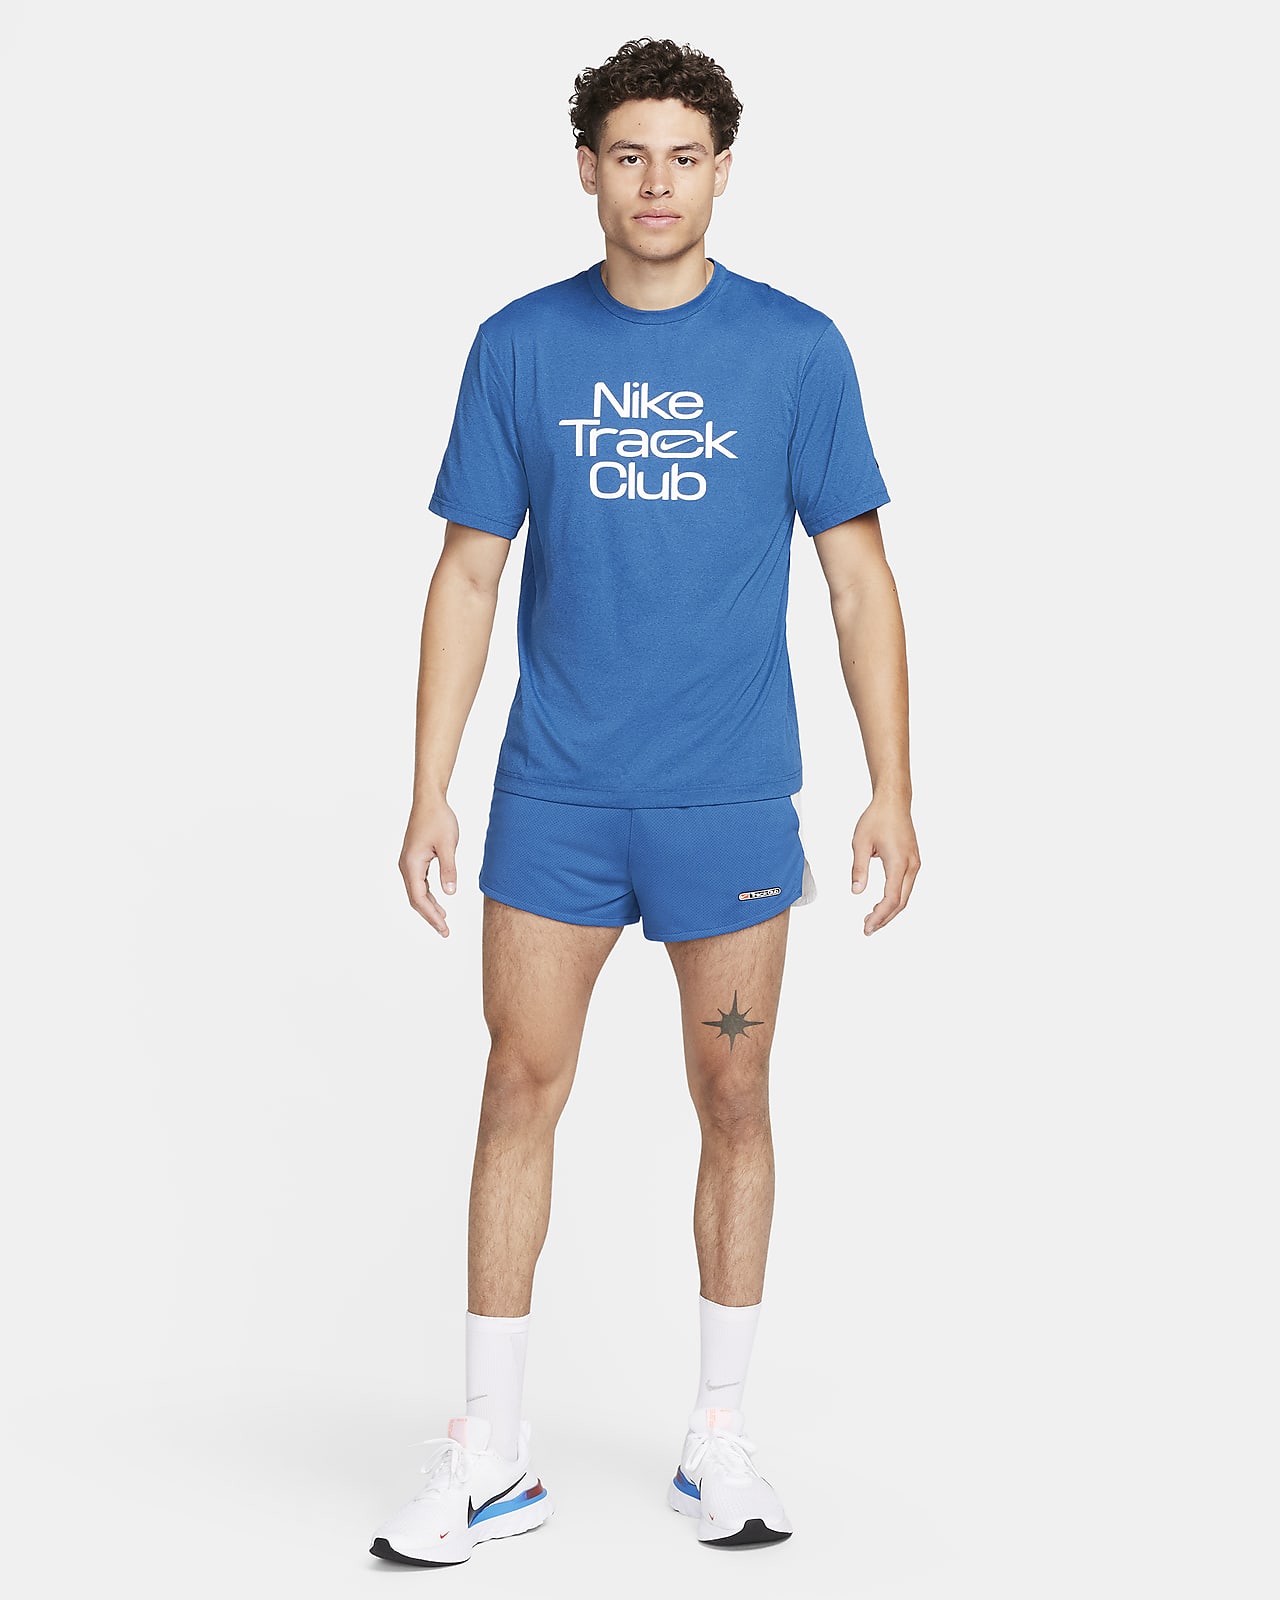 https://static.nike.com/a/images/t_PDP_1280_v1/f_auto,q_auto:eco/705aa415-b66c-41b0-a2c3-961d4eacdc03/track-club-mens-dri-fit-3-brief-lined-running-shorts-pvb4cR.png